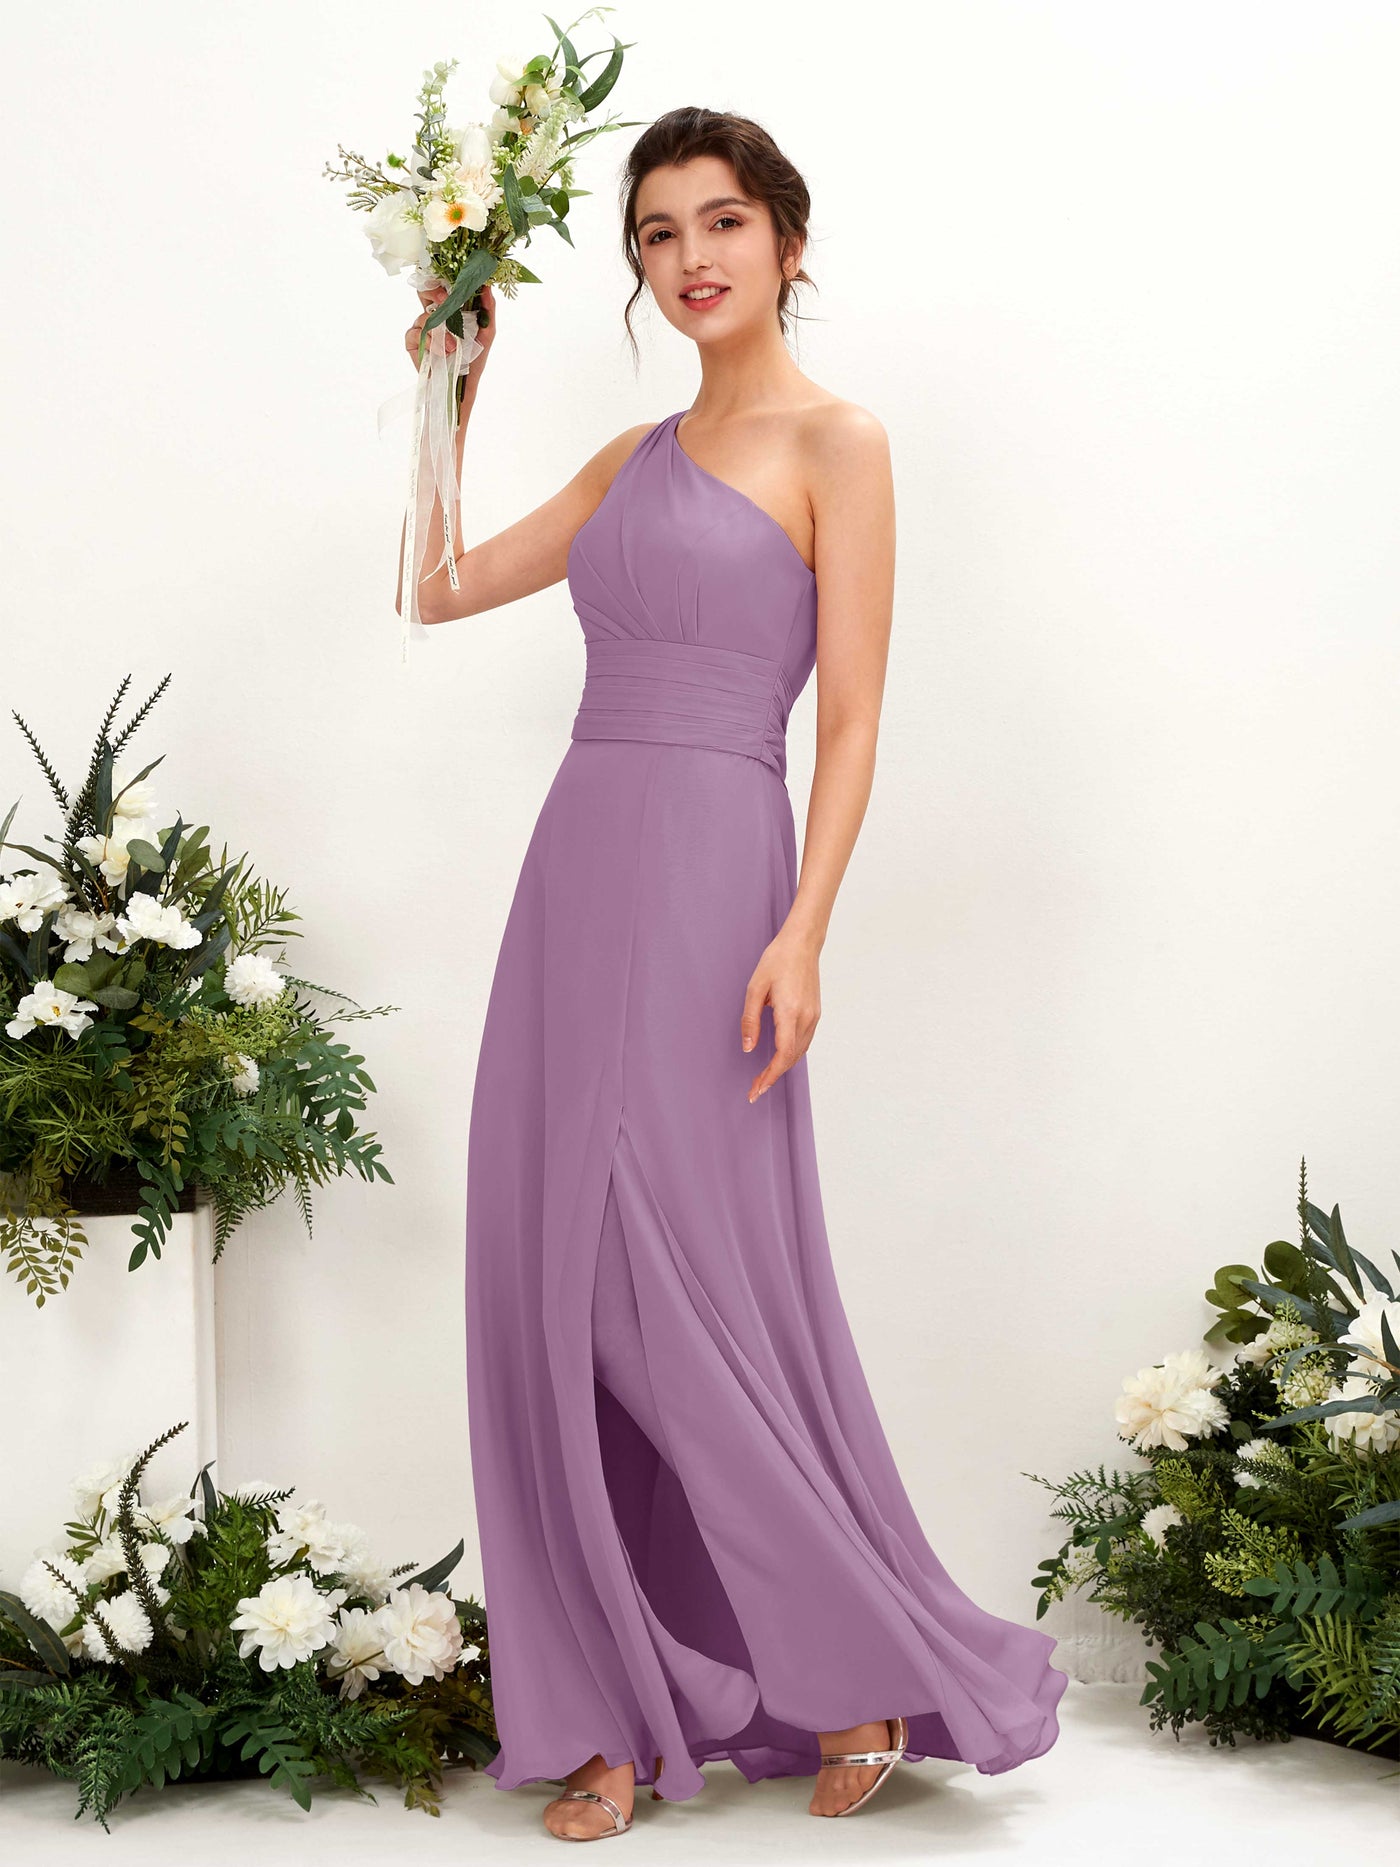 Orchid Mist Bridesmaid Dresses Bridesmaid Dress A-line Chiffon One Shoulder Full Length Sleeveless Wedding Party Dress (81224721)#color_orchid-mist